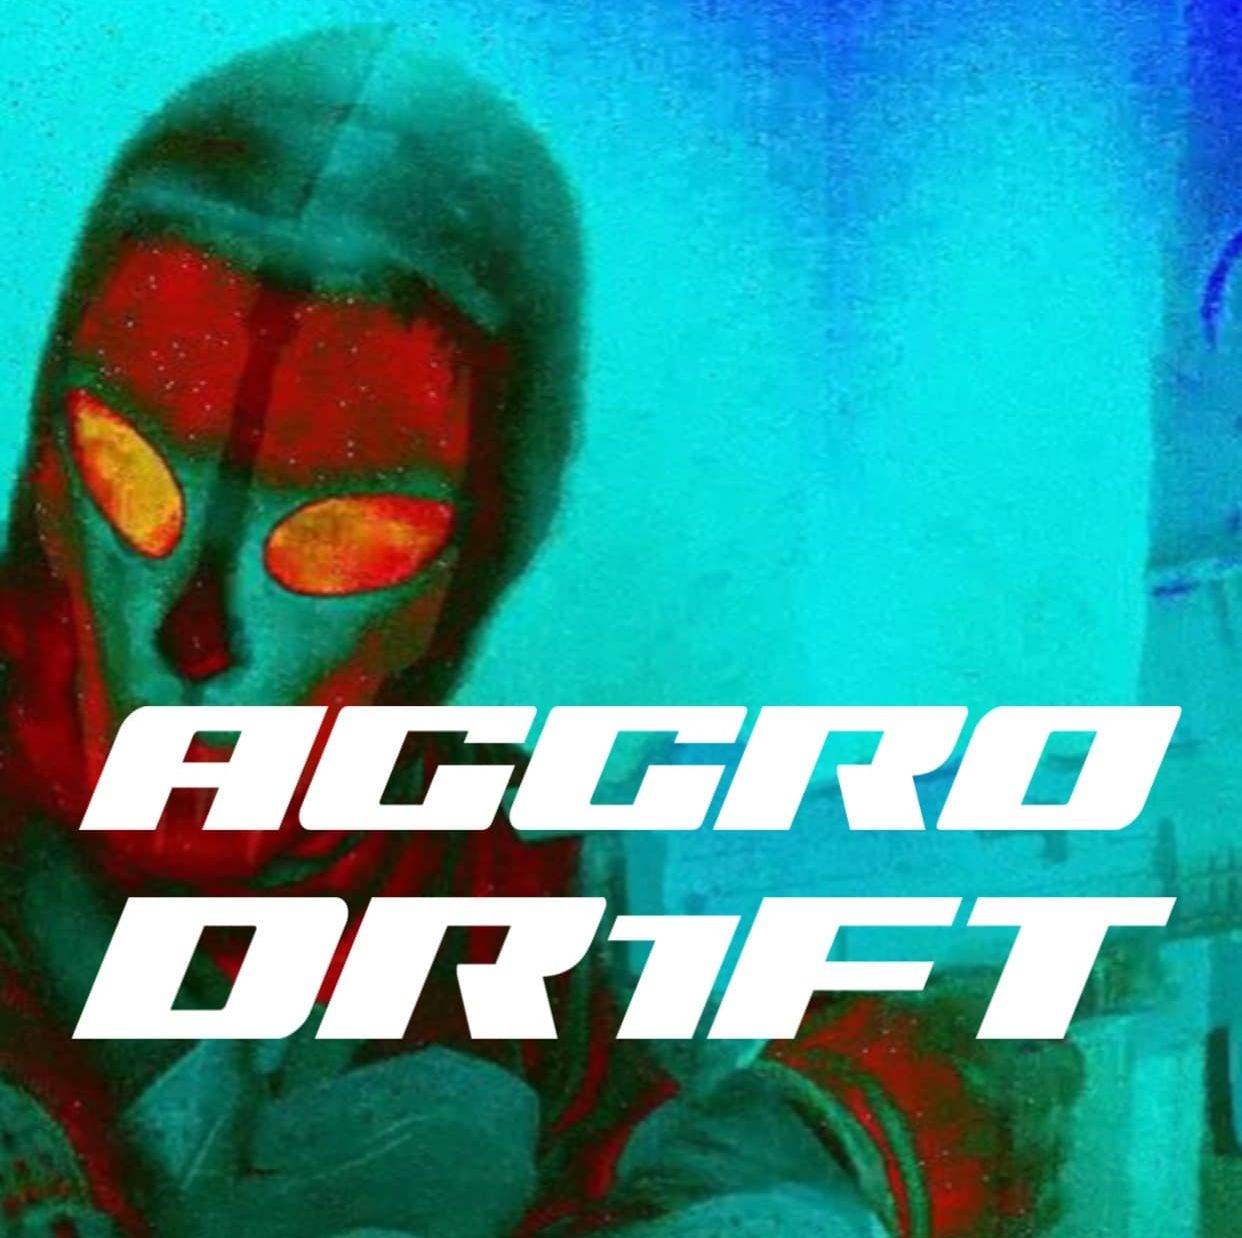 Travis Scott Takes A Cinematic Leap In Harmony Korine'S 'Aggro Dr1Ft', Yours Truly, News, May 4, 2024